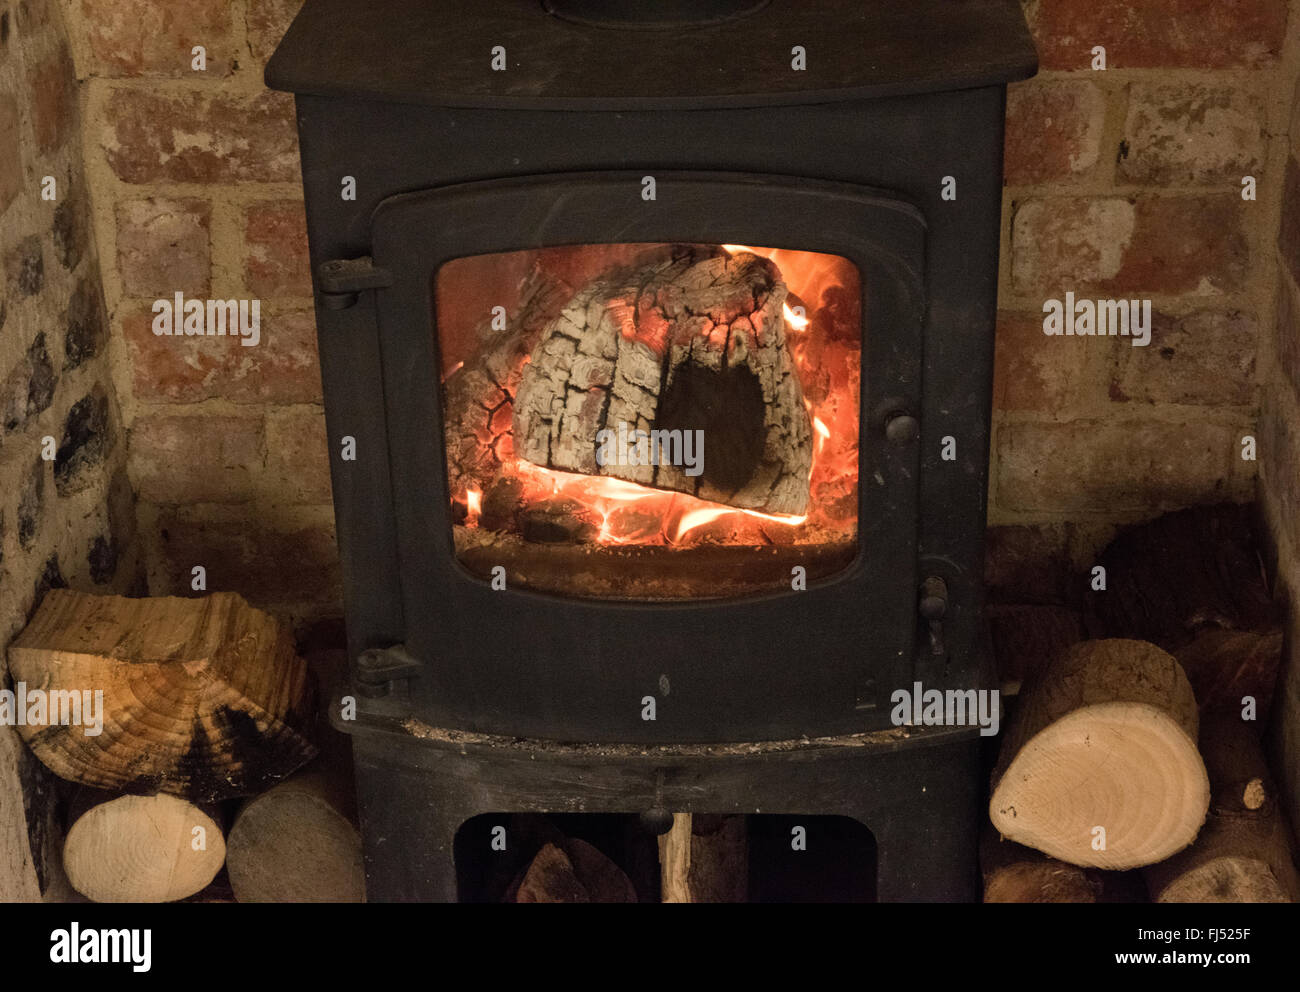 Close-up view of logburner with chopped logs at side Stock Photo